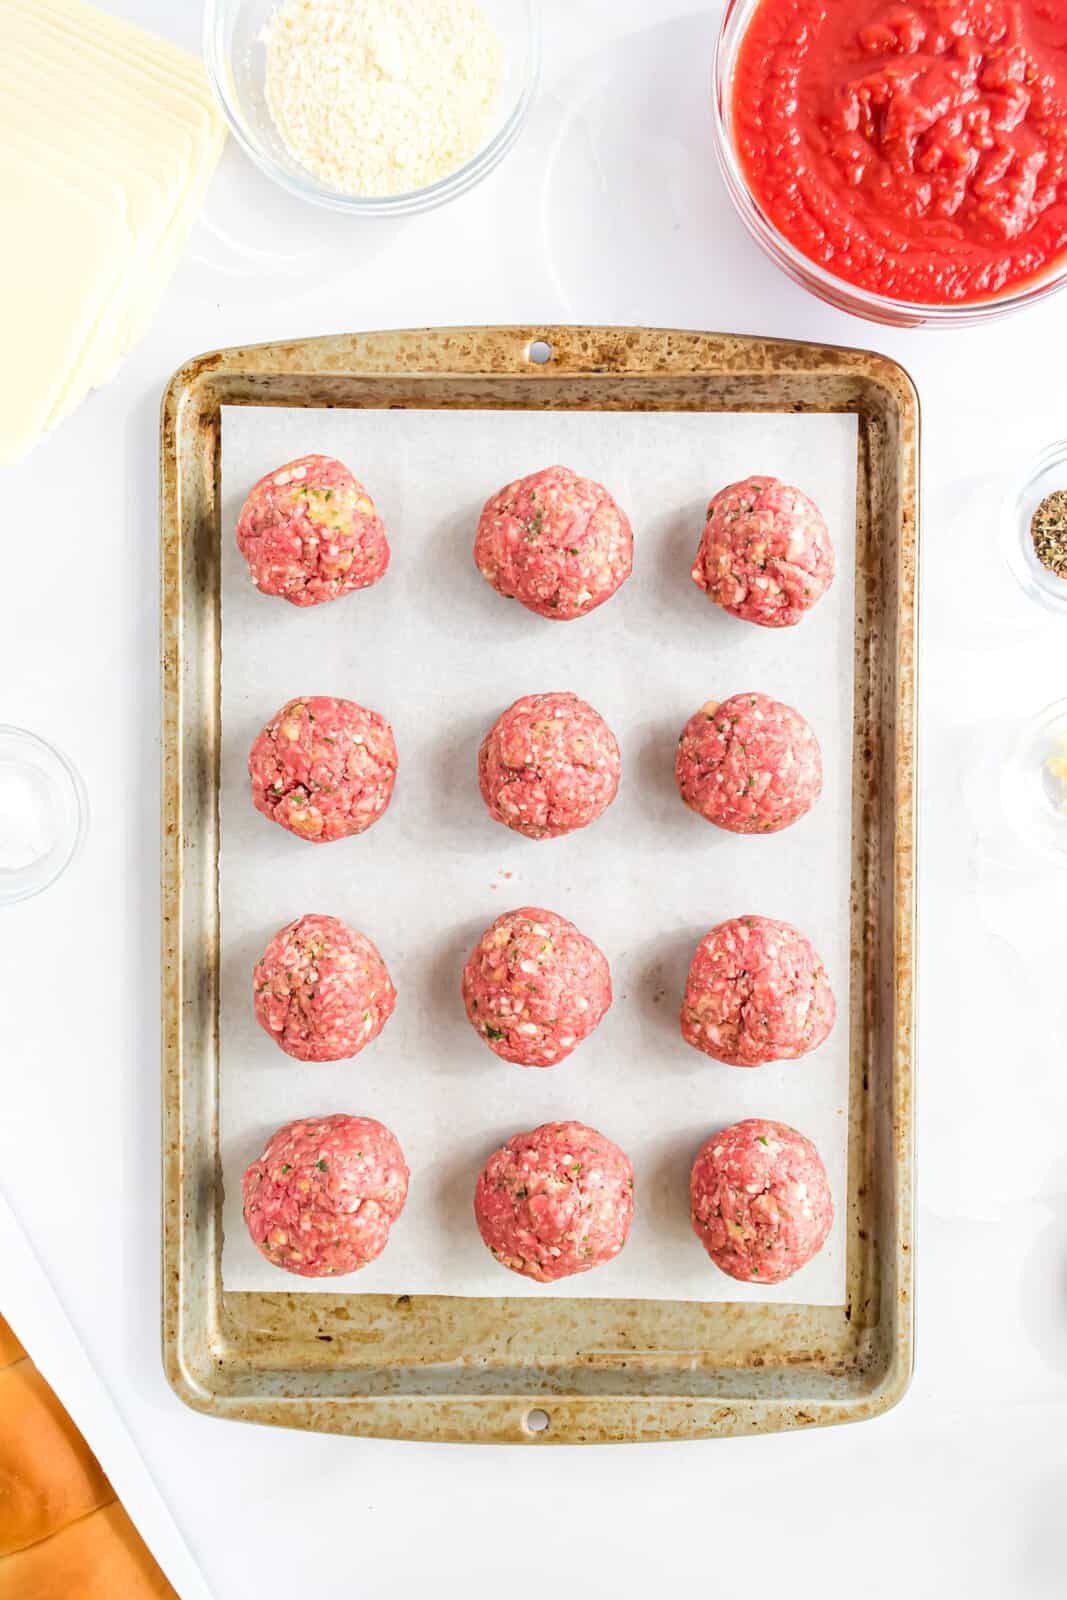 Meatballs on a parchment lined baking sheet.